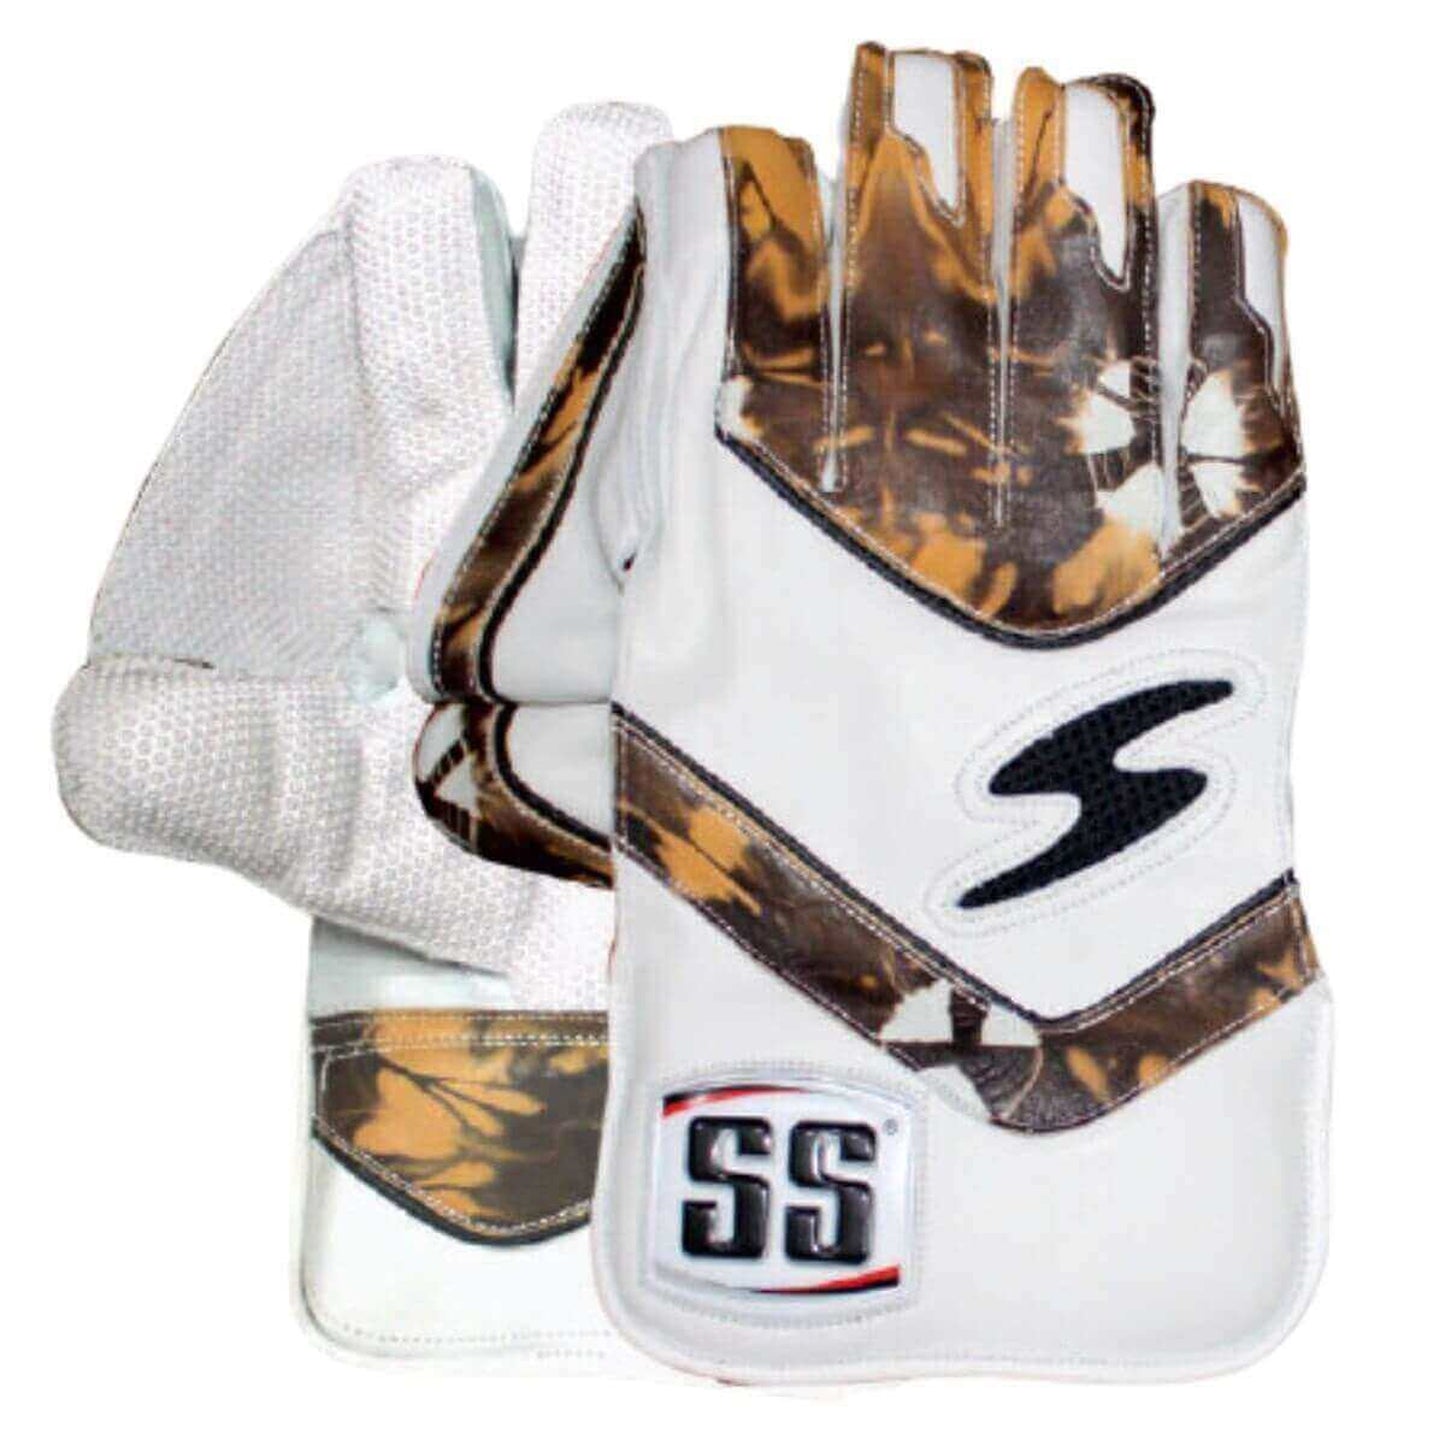 SS Limited Edition Wicket Keeping Gloves - Best Price online Prokicksports.com